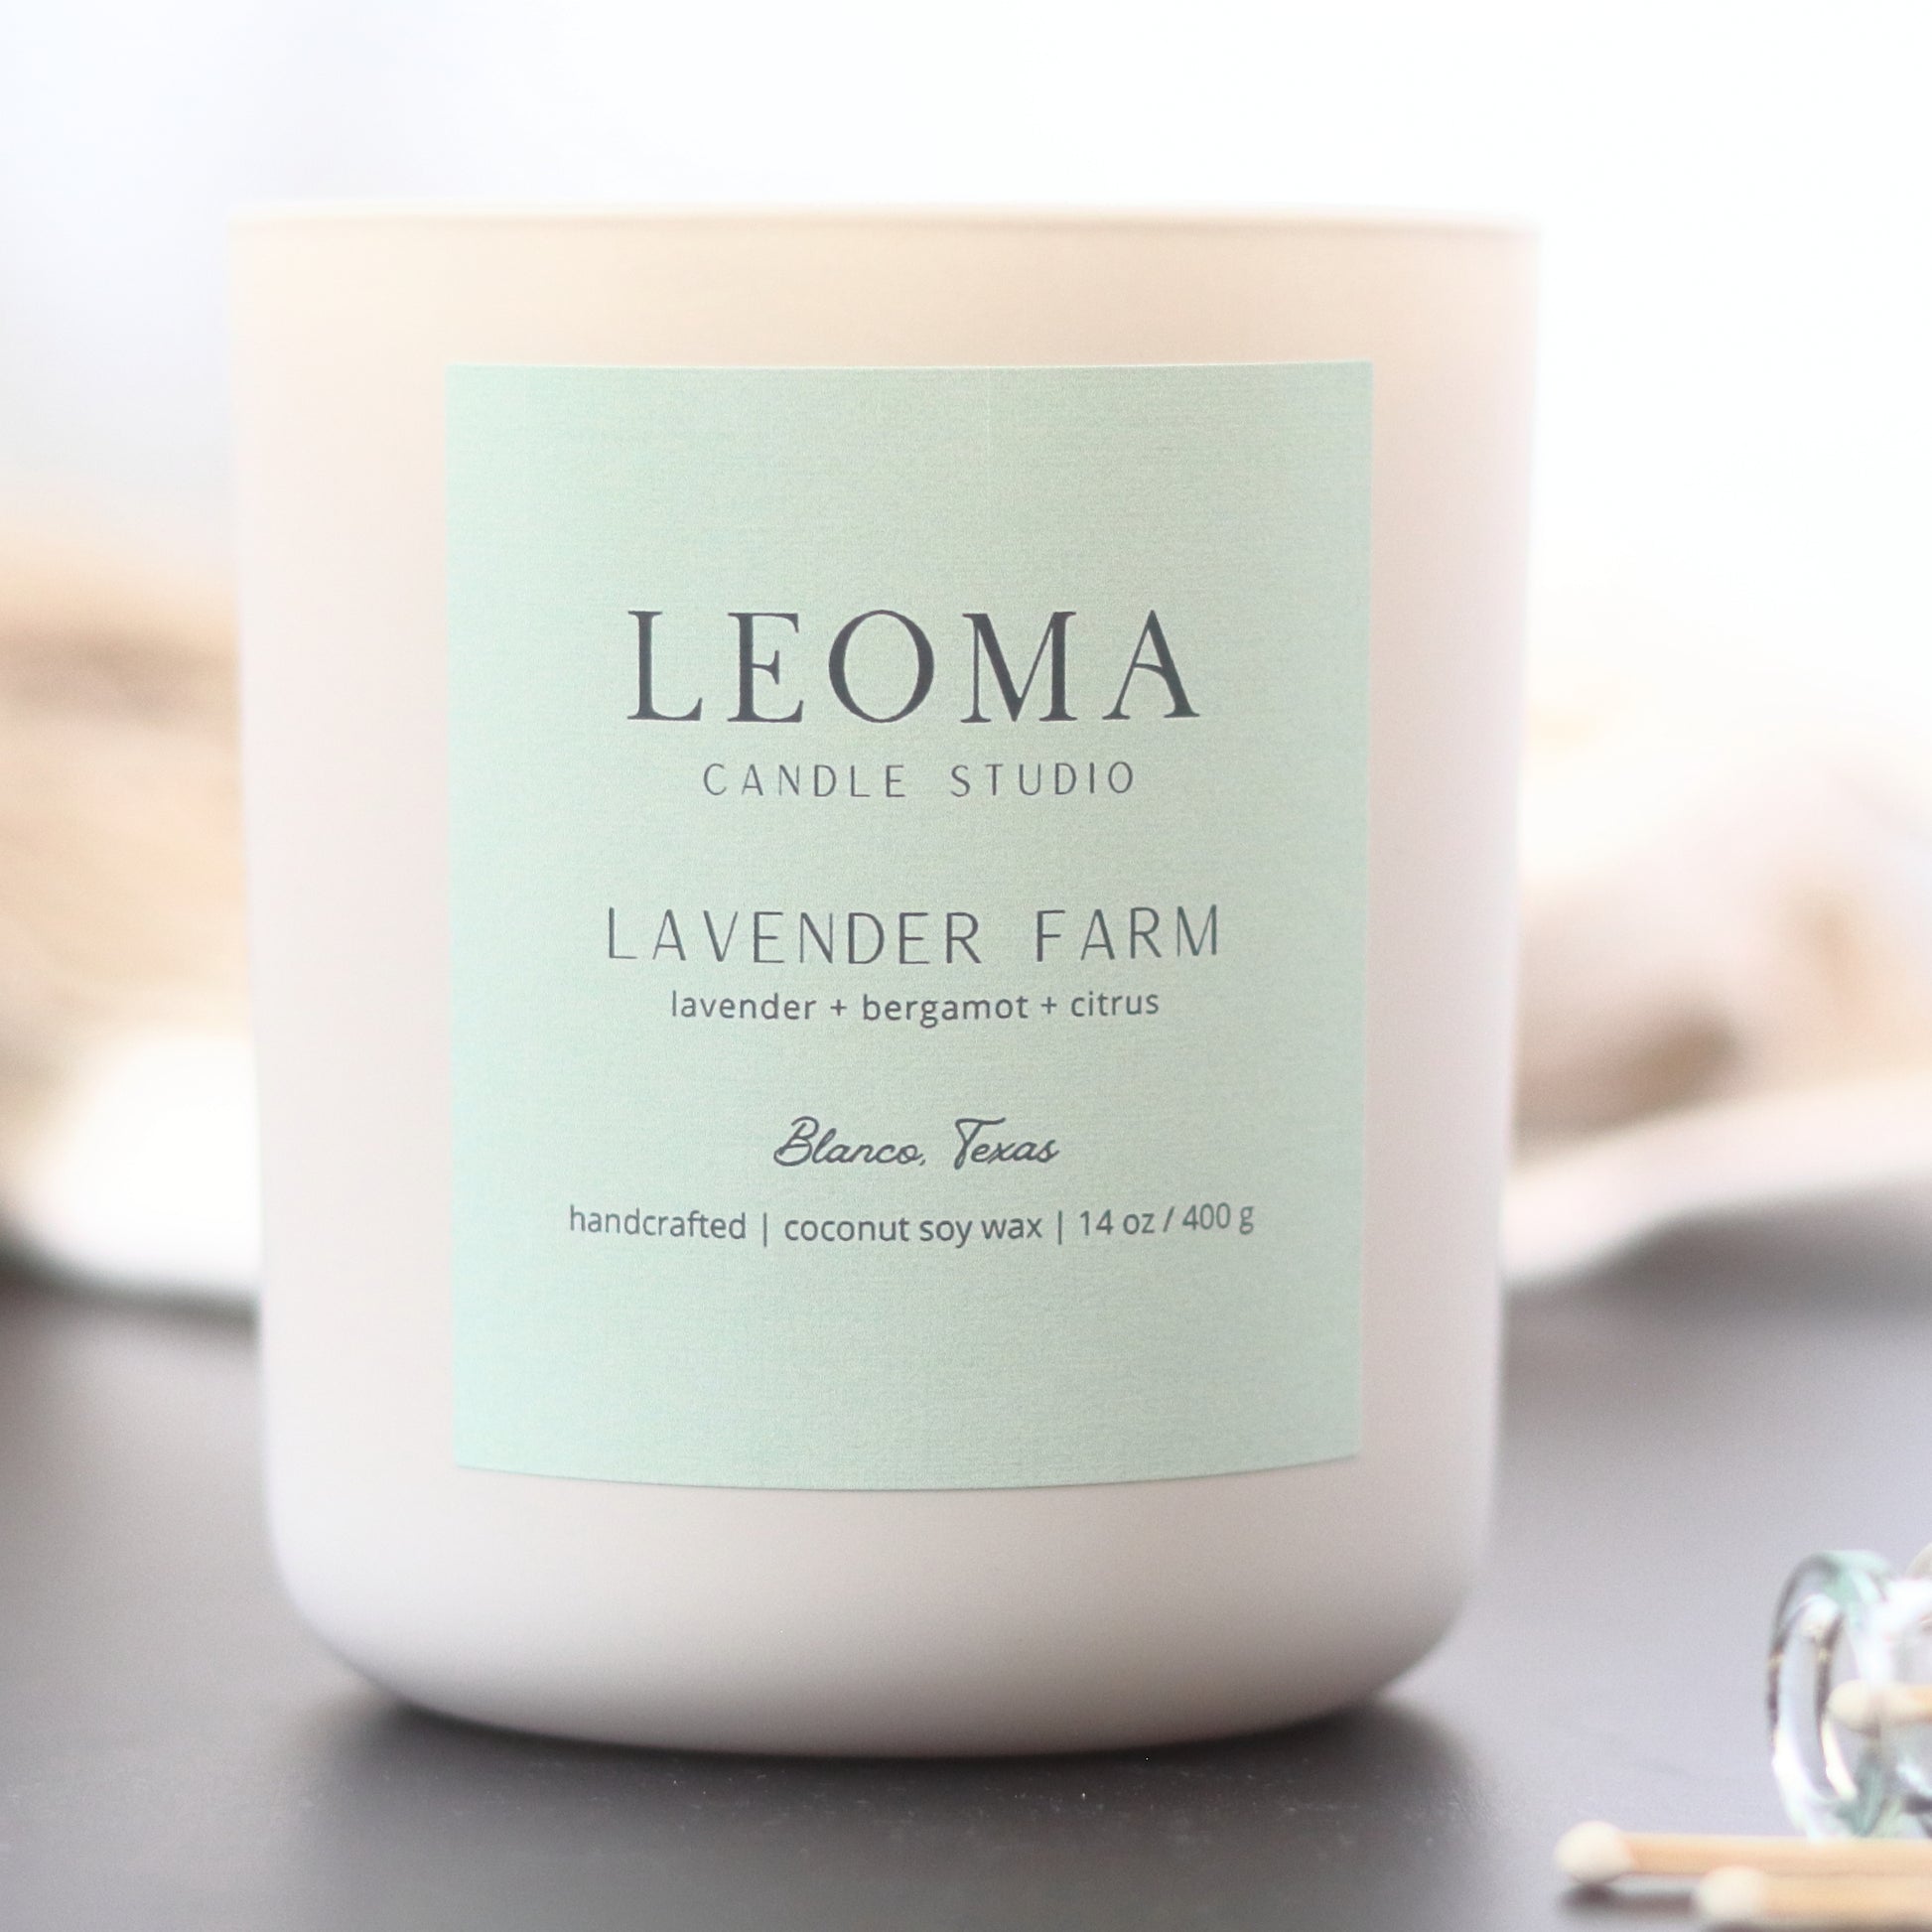 Handcrafted eco-friendly scented candle. Natural coconut & soy wax, toxin-free, 100% cotton wicks. Cream vessel. Lavender Farm classic scent.